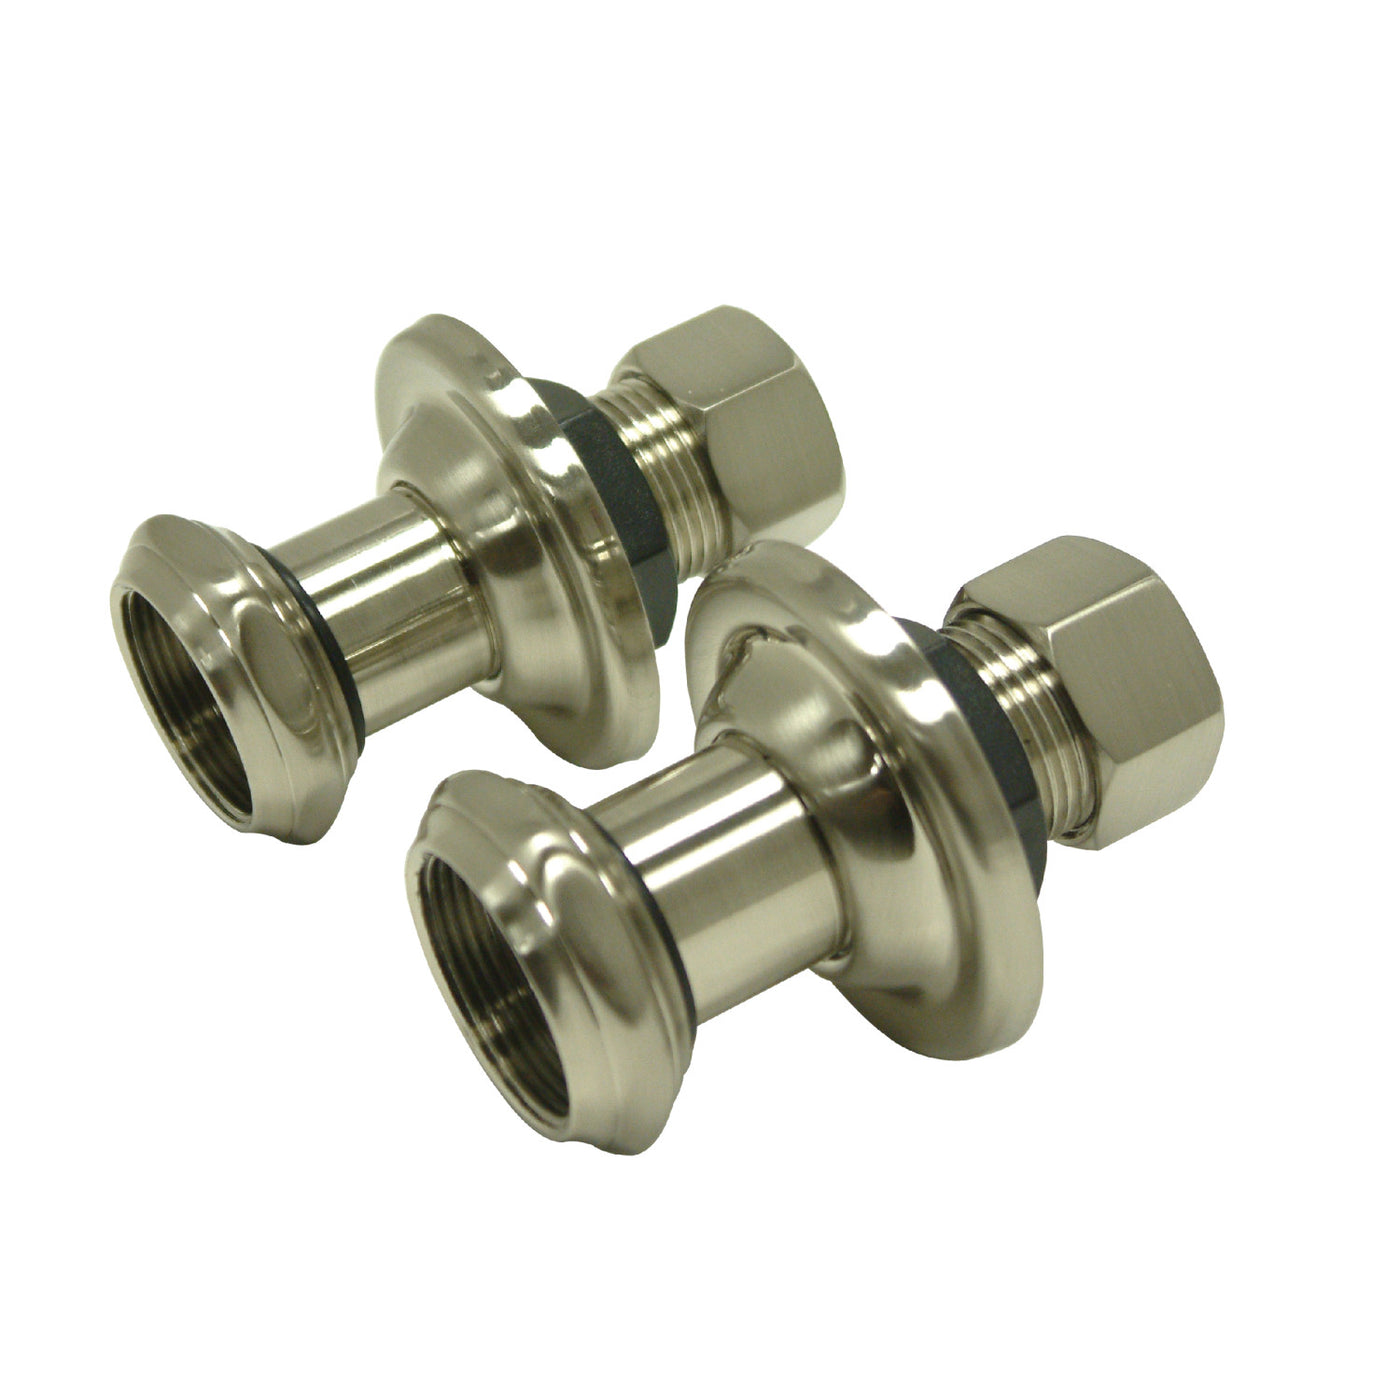 Elements of Design DSU4108 Wall Union Extension, 1-3/4 inch, Brushed Nickel